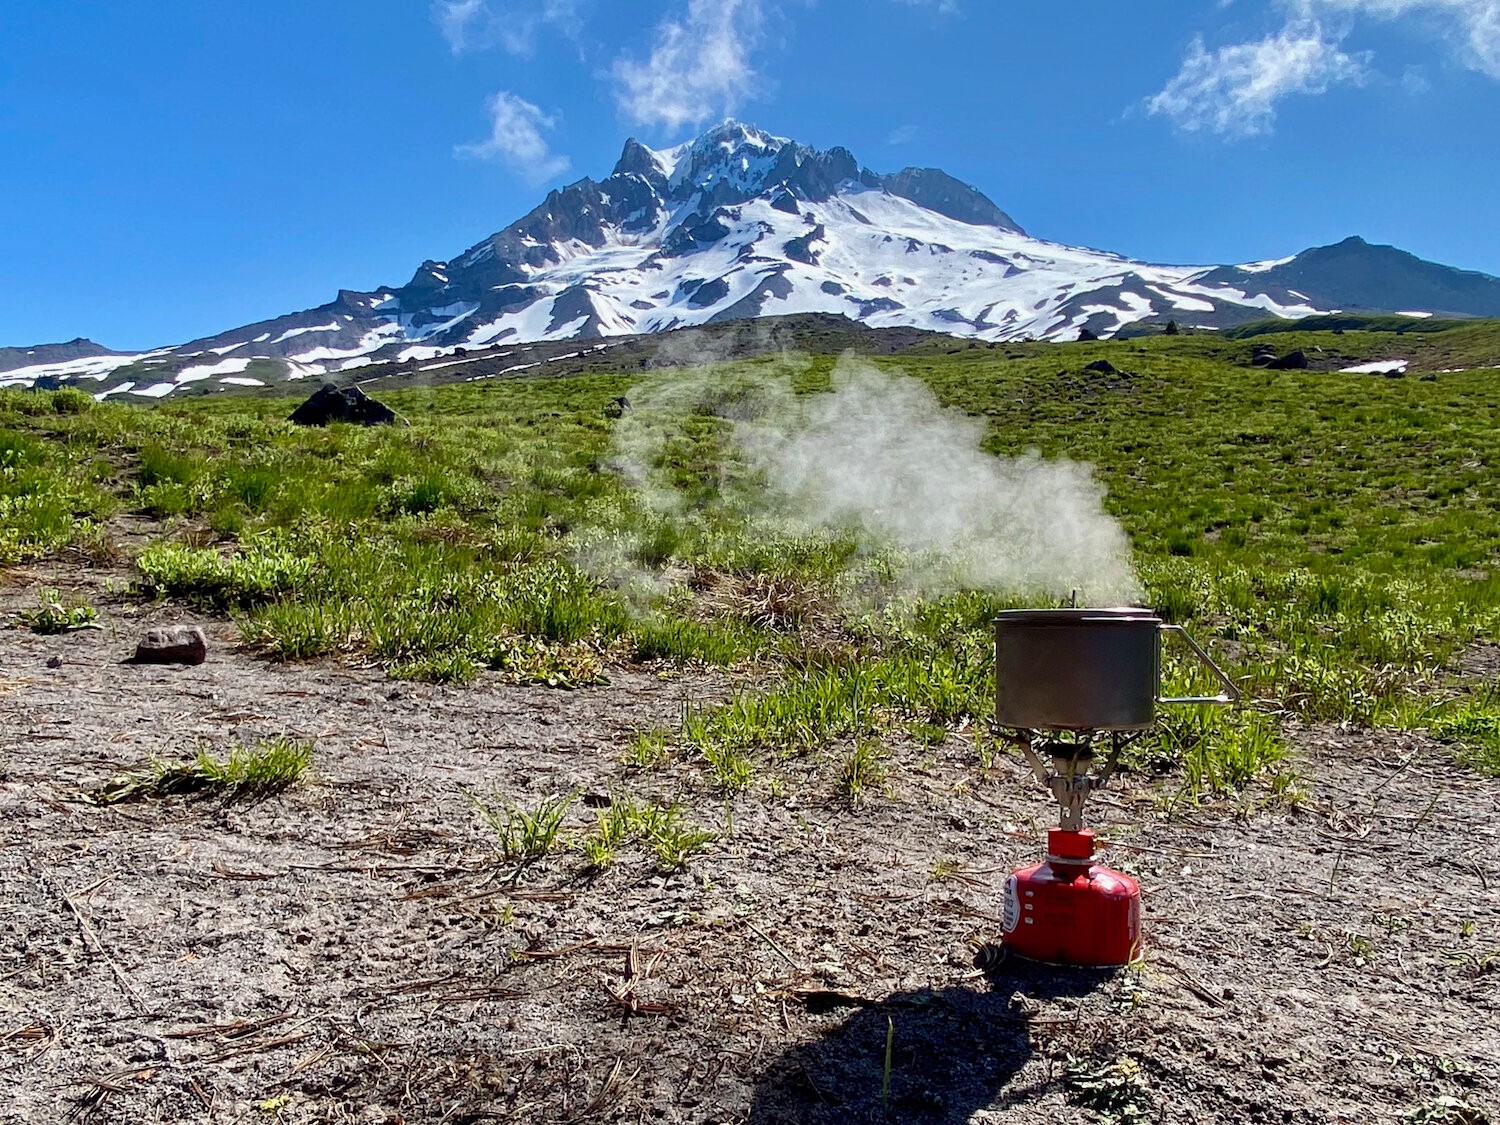 boiling-water-with-the-msr-pocket-rocket-2-in-front-of-a-mountain?format=1500w